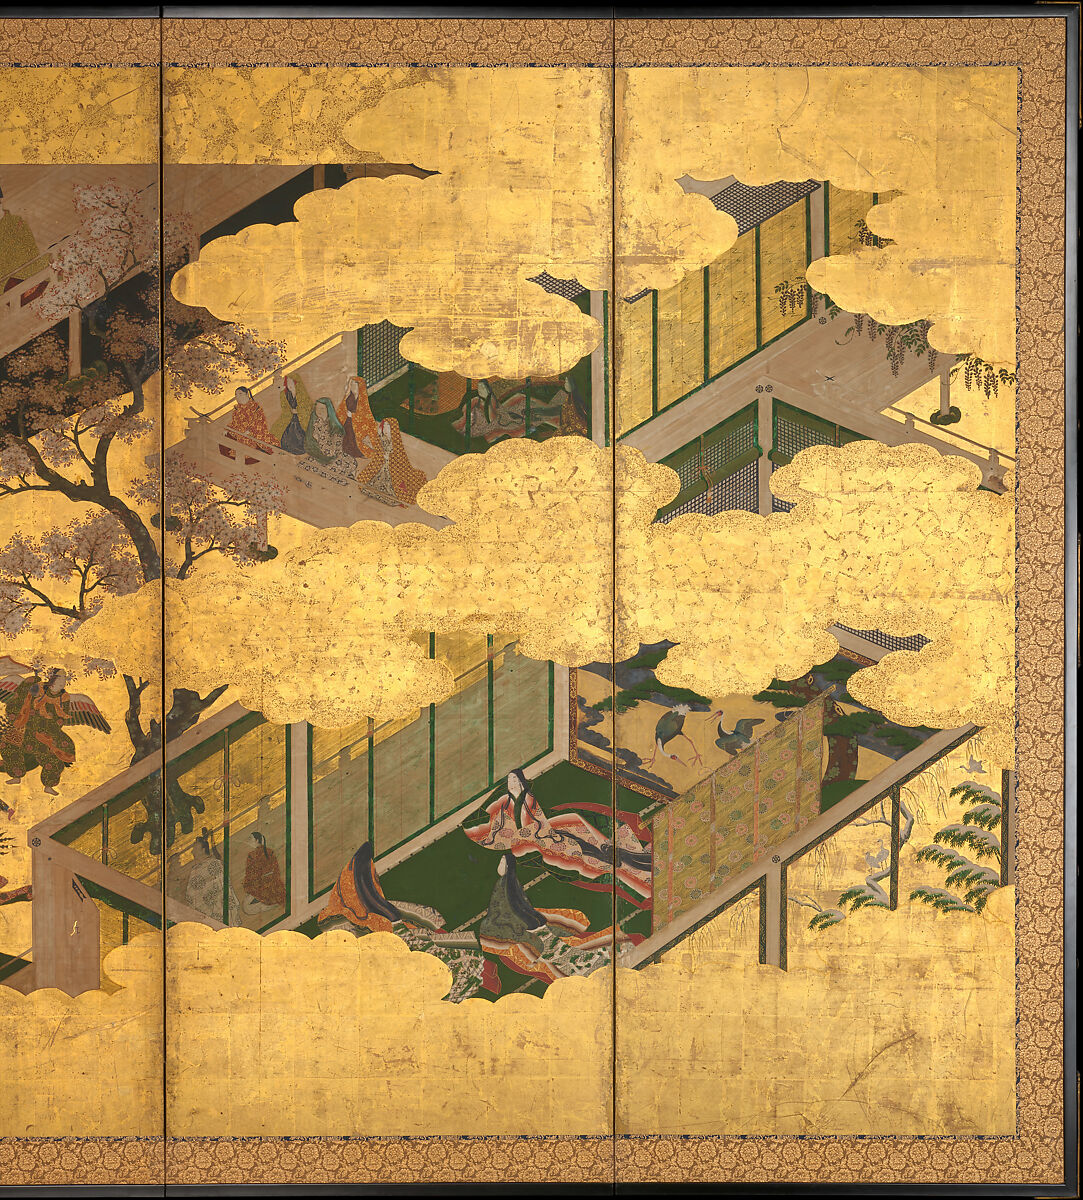 “Butterflies”, Tosa Mitsuyoshi (Japanese, 1539–1613), Six-panel folding screen; ink, color, gold, and gold leaf on paper, Japan 